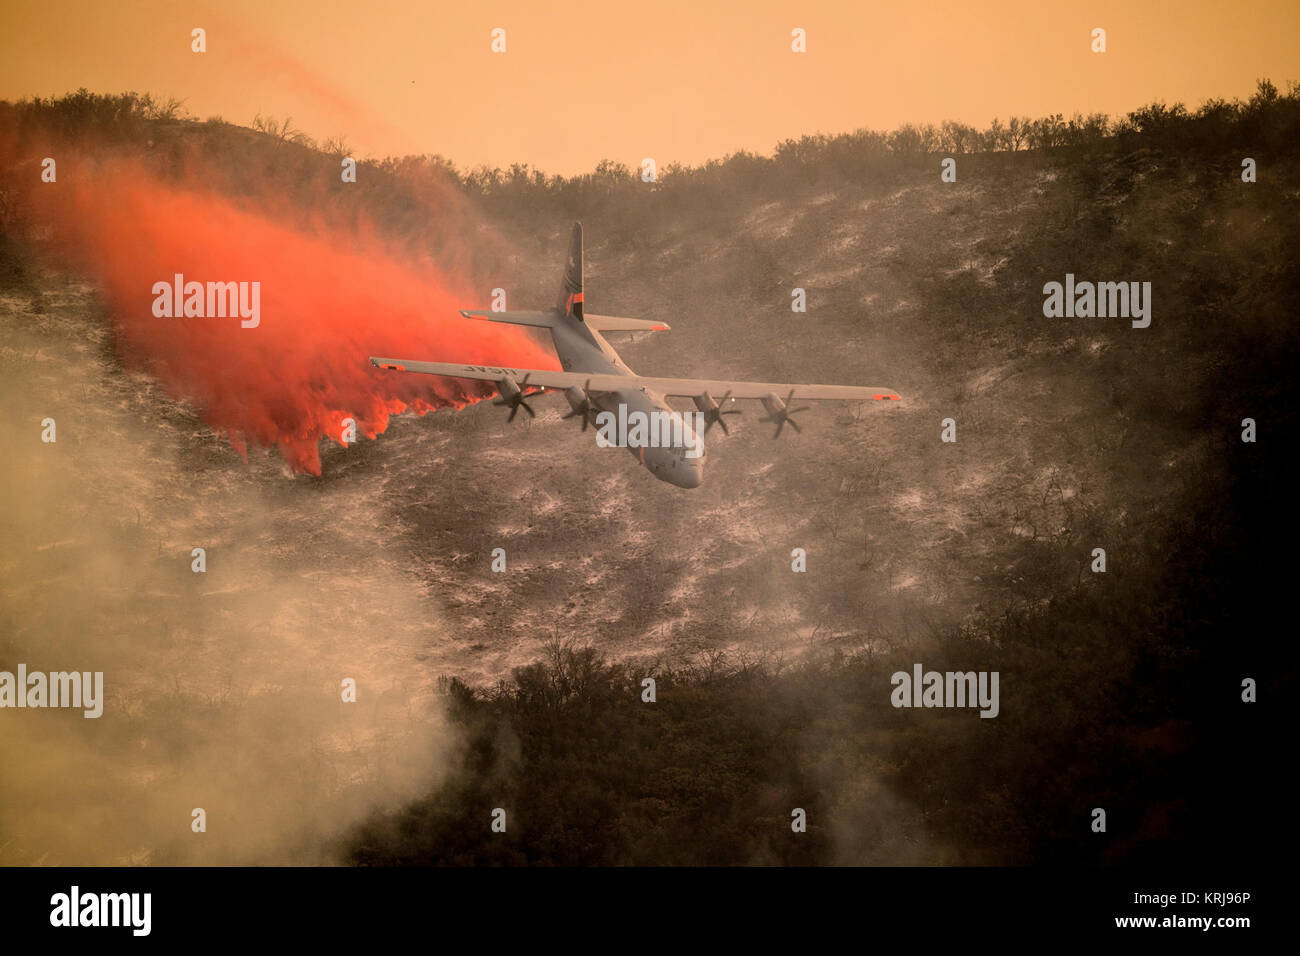 A U.S. Air National Guard C-130J Hercules aircraft equipped with the MAFFS 2 (Modular Airborne Fire Fighting System) drops a line of fire retardant on the Thomas Fire in the hills above the city of Santa Barbara, California, Dec. 13, 2017. The 146th Airlift Wing has been supporting CAL FIRE’s efforts to battle the Thomas Fire raging in Southern California. (U.S. Air National Guard Stock Photo